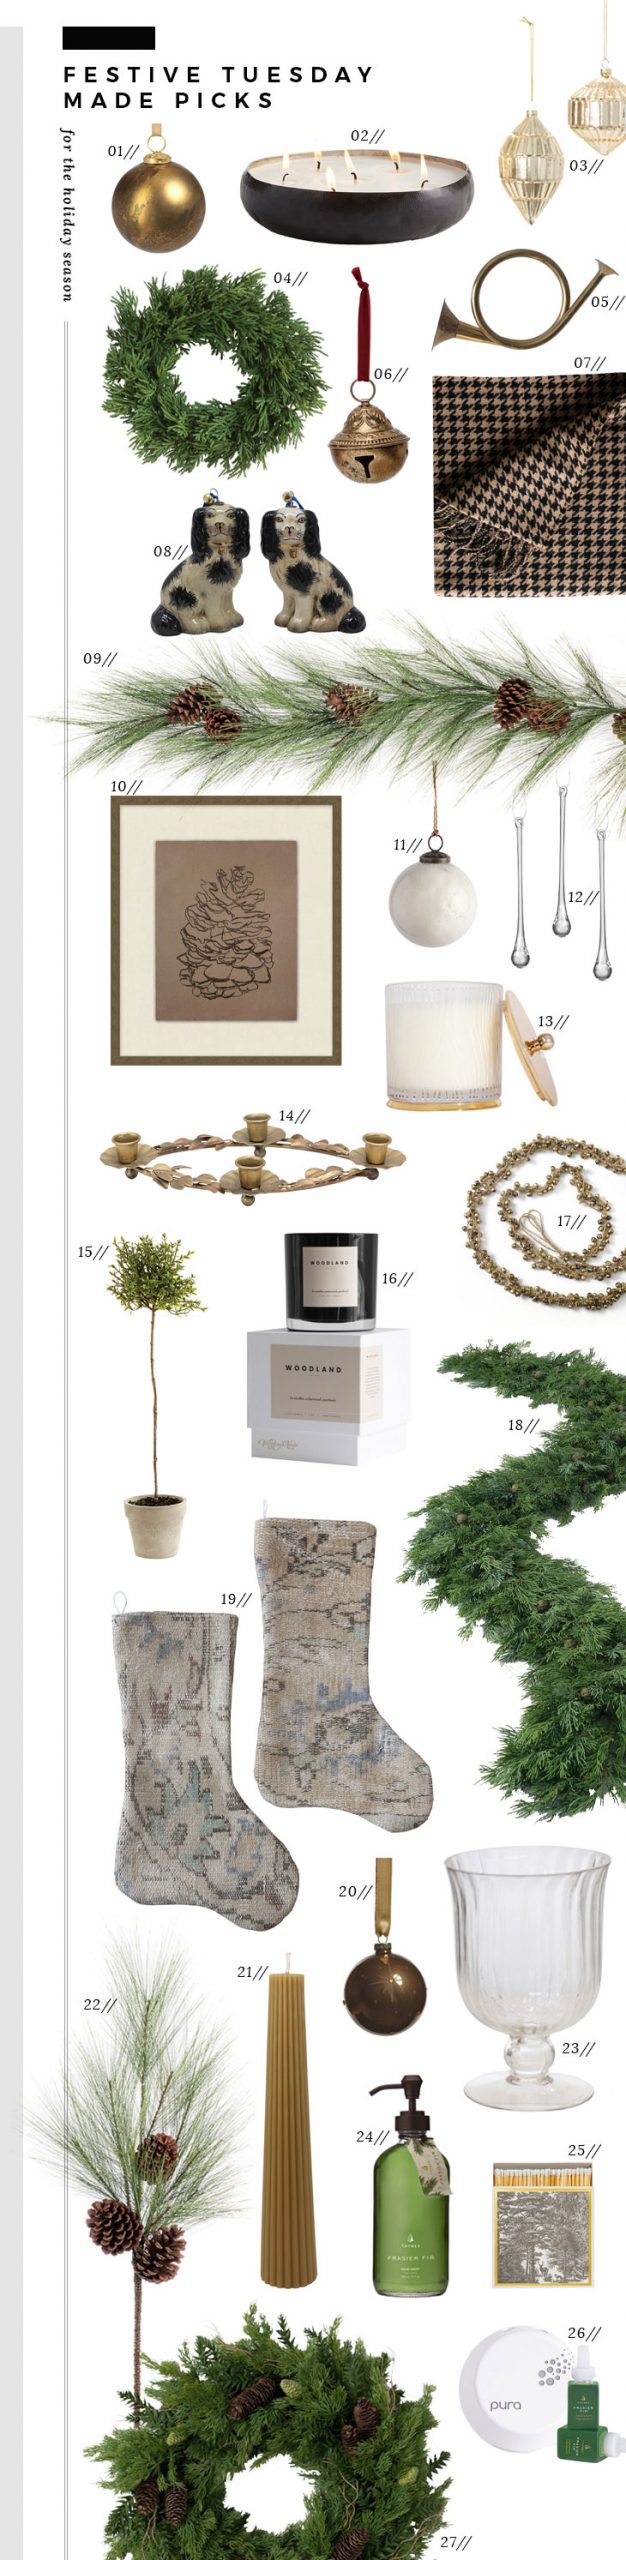 Roundup : Holiday Decor from Tuesday Made - roomfortuesday.com